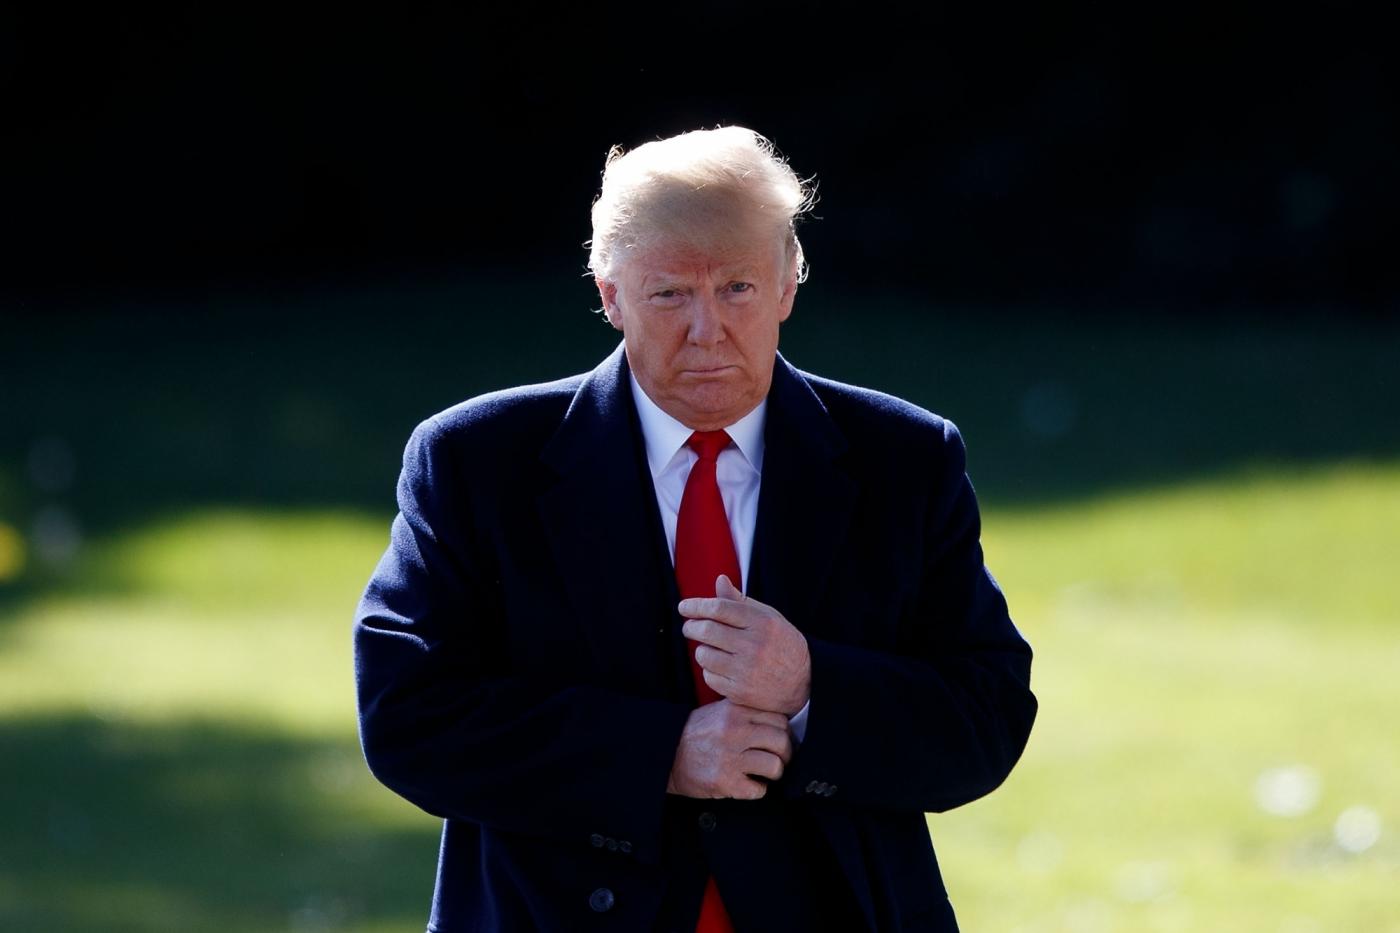 WASHINGTON, Oct. 22, 2018 (Xinhua) -- U.S. President Donald Trump speaks to reporters before departing from the White House in Washington D.C., the United States, on Oct. 22, 2018. Donald Trump said on Monday that his country will begin cutting off or reducing aid to three countries in Central America, citing migrant caravan heading to the U.S. border. (Xinhua/Ting Shen/IANS) by . 